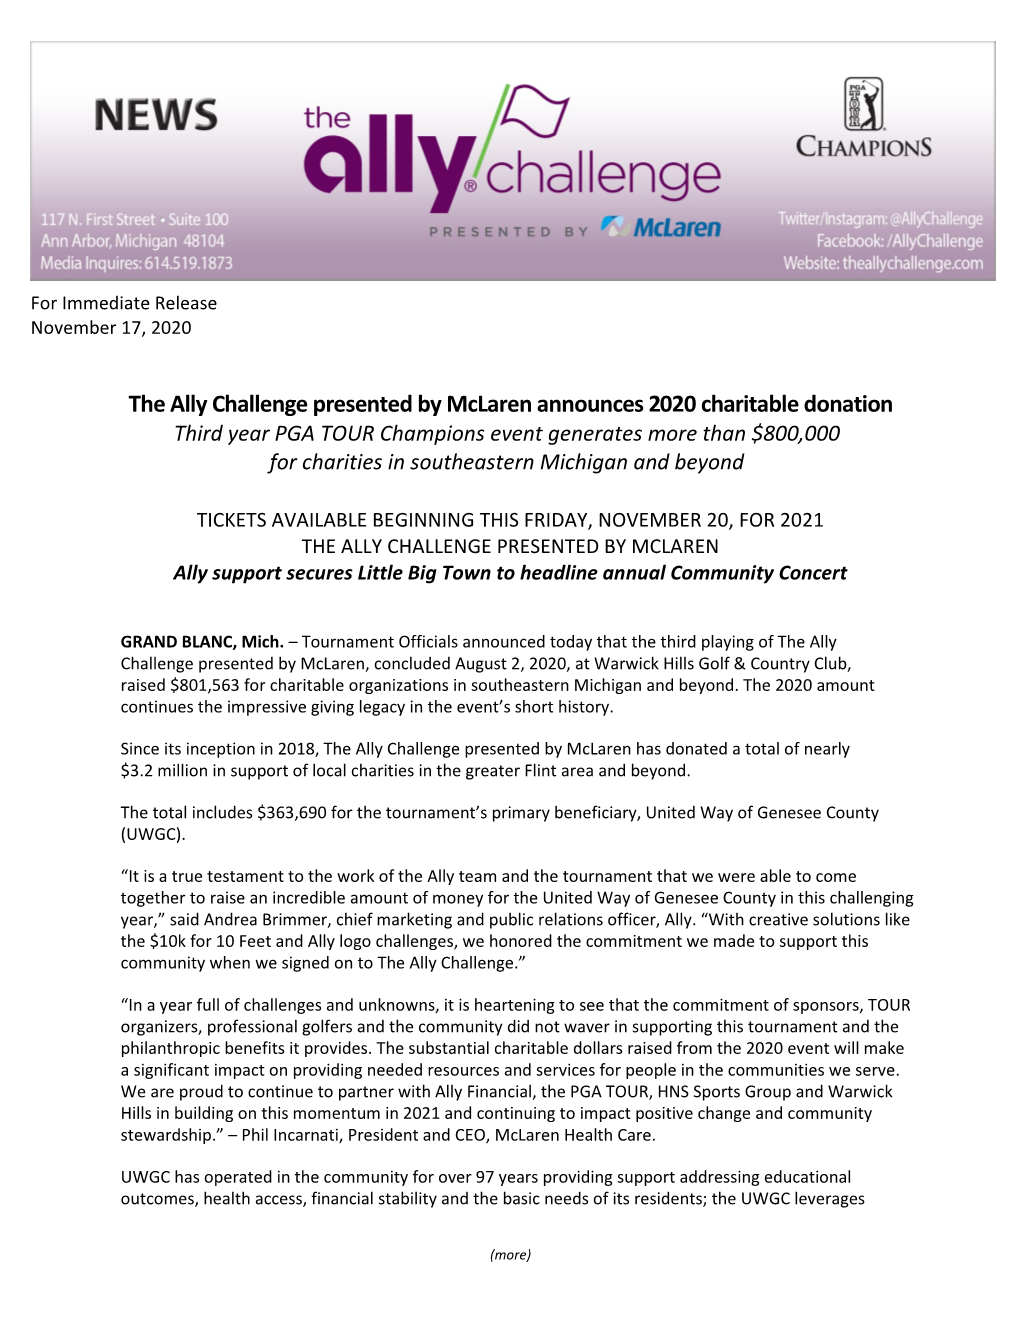 The Ally Challenge Presented by Mclaren Announces 2020